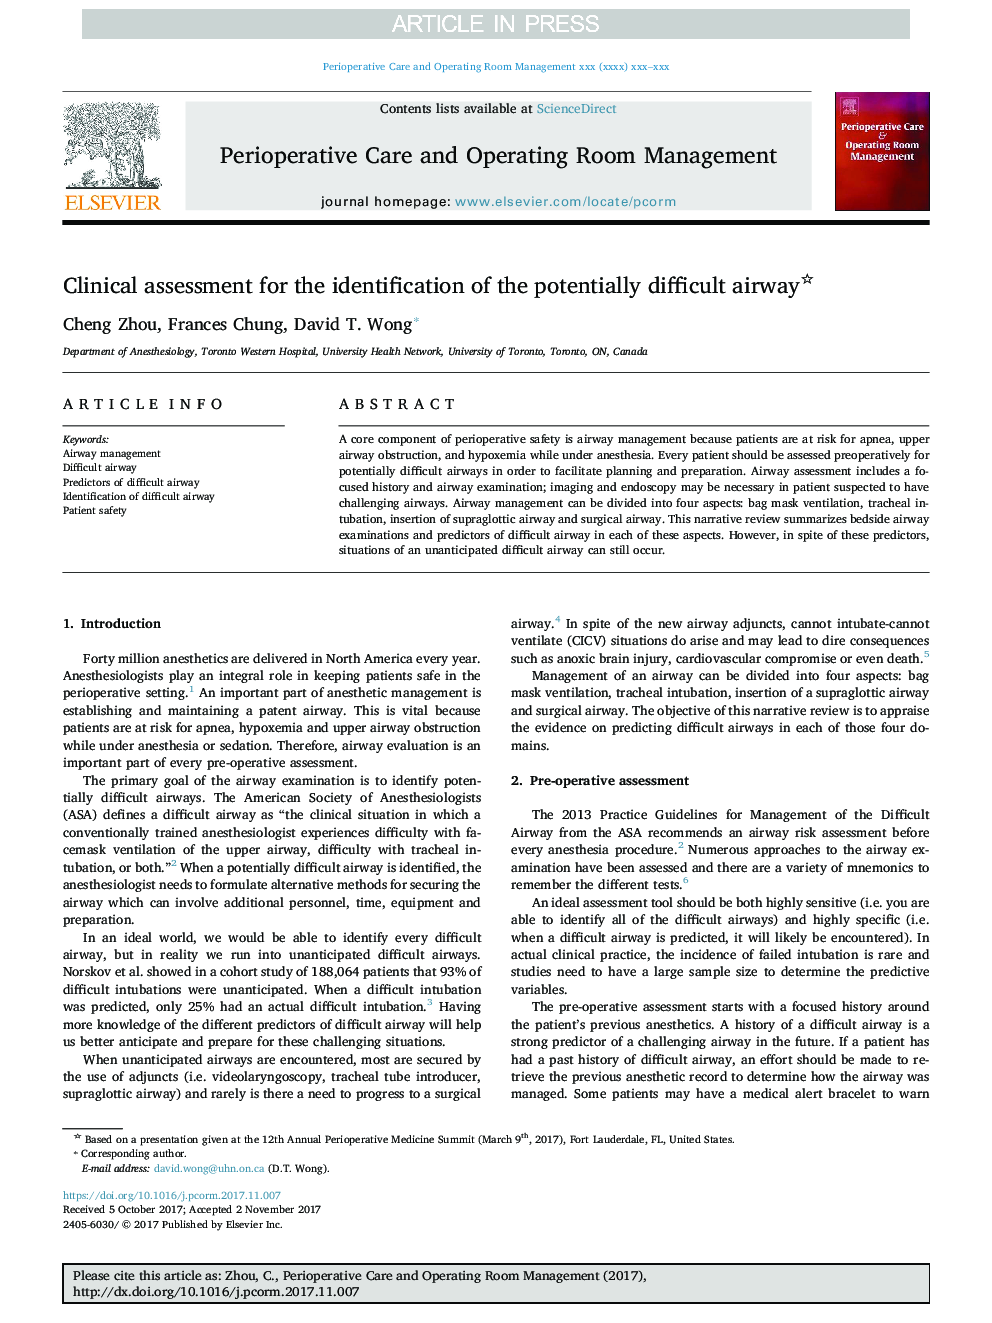 Clinical assessment for the identification of the potentially difficult airway